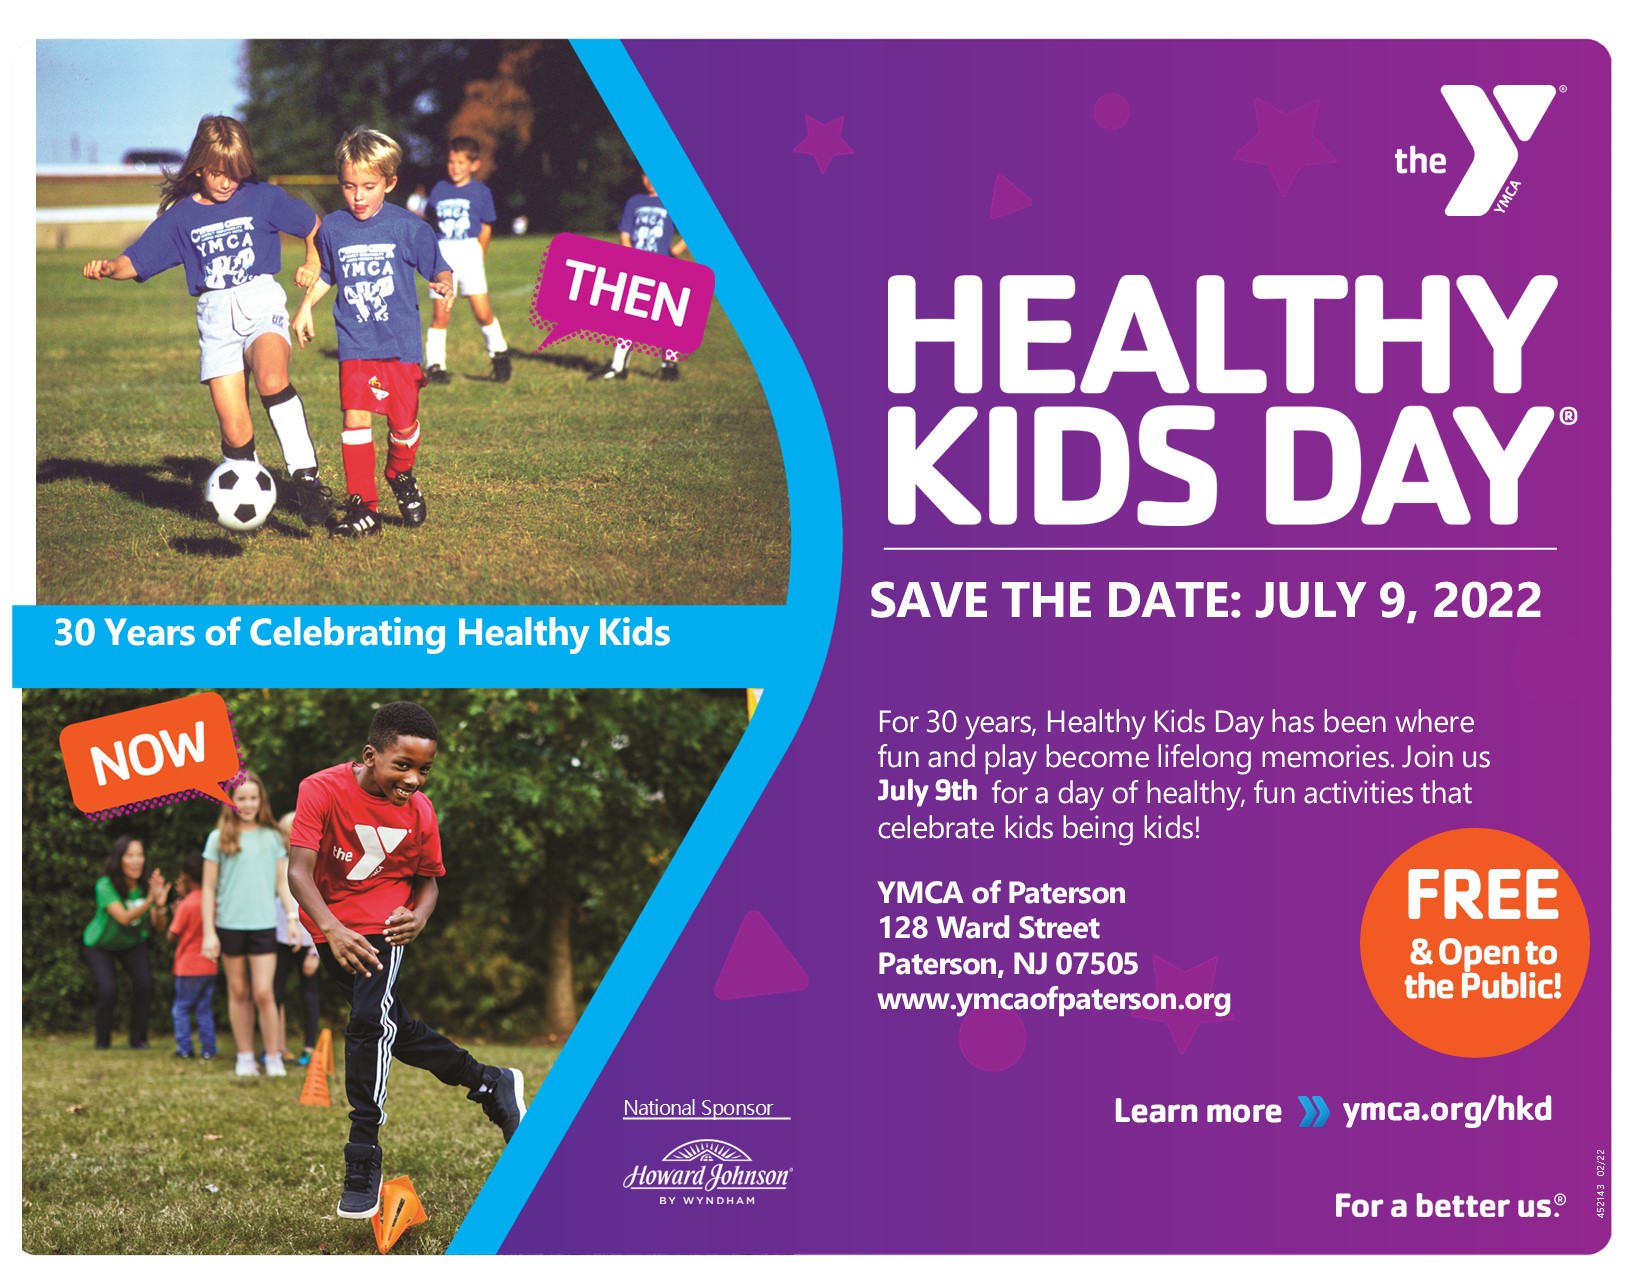 d-2022-healthy-kids-day-_ymca-of-paterson.jpg